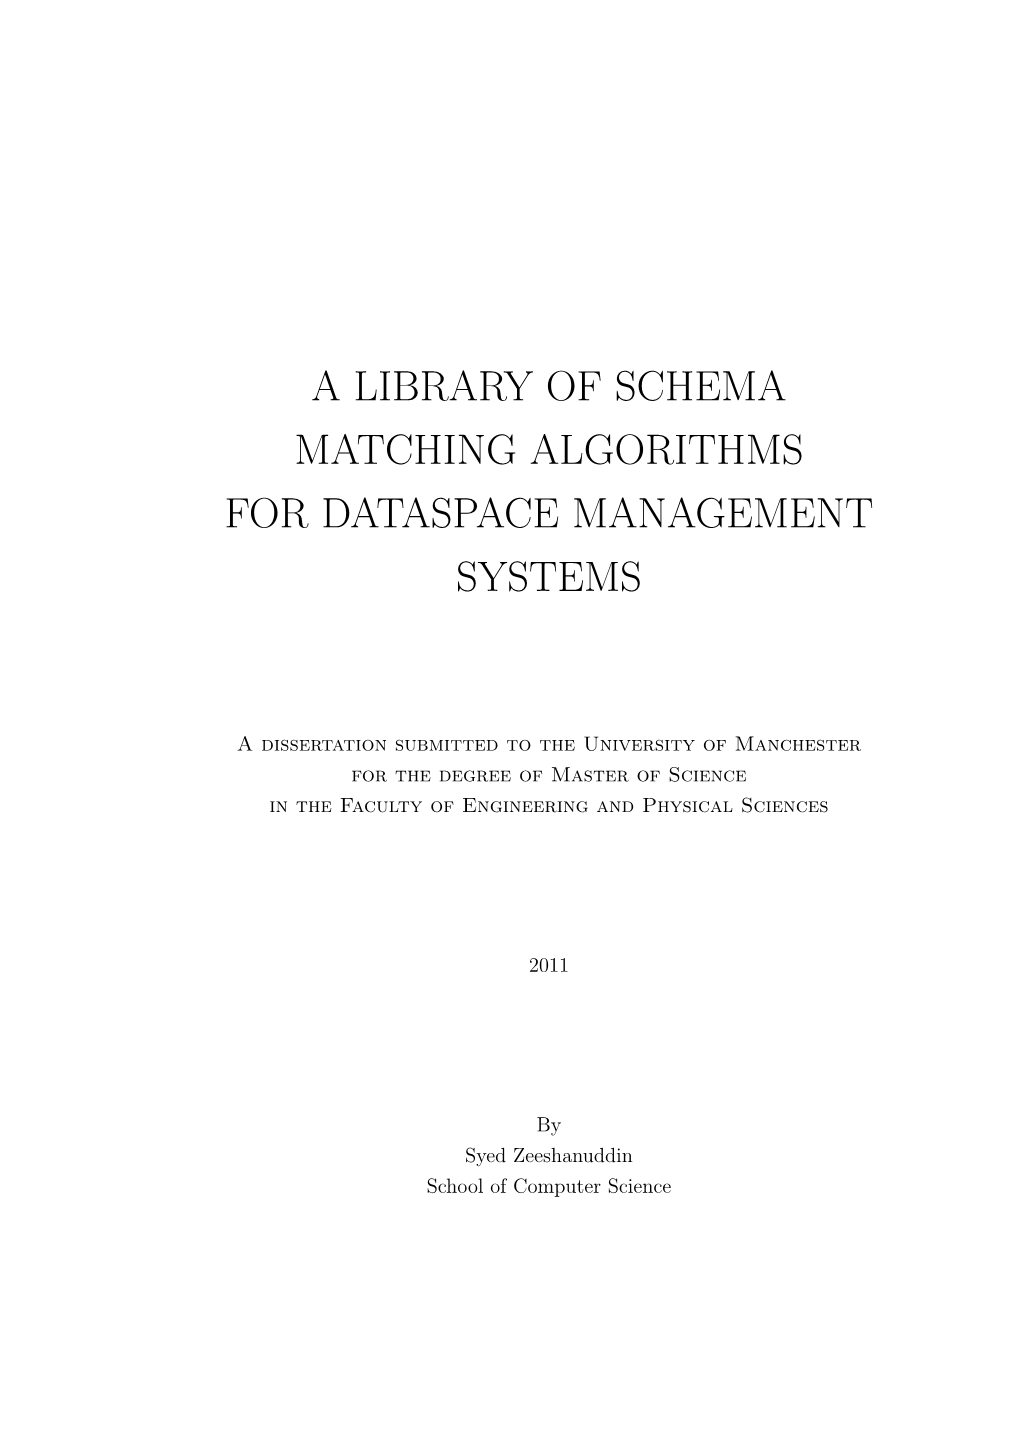 A Library of Schema Matching Algorithms for Dataspace Management Systems